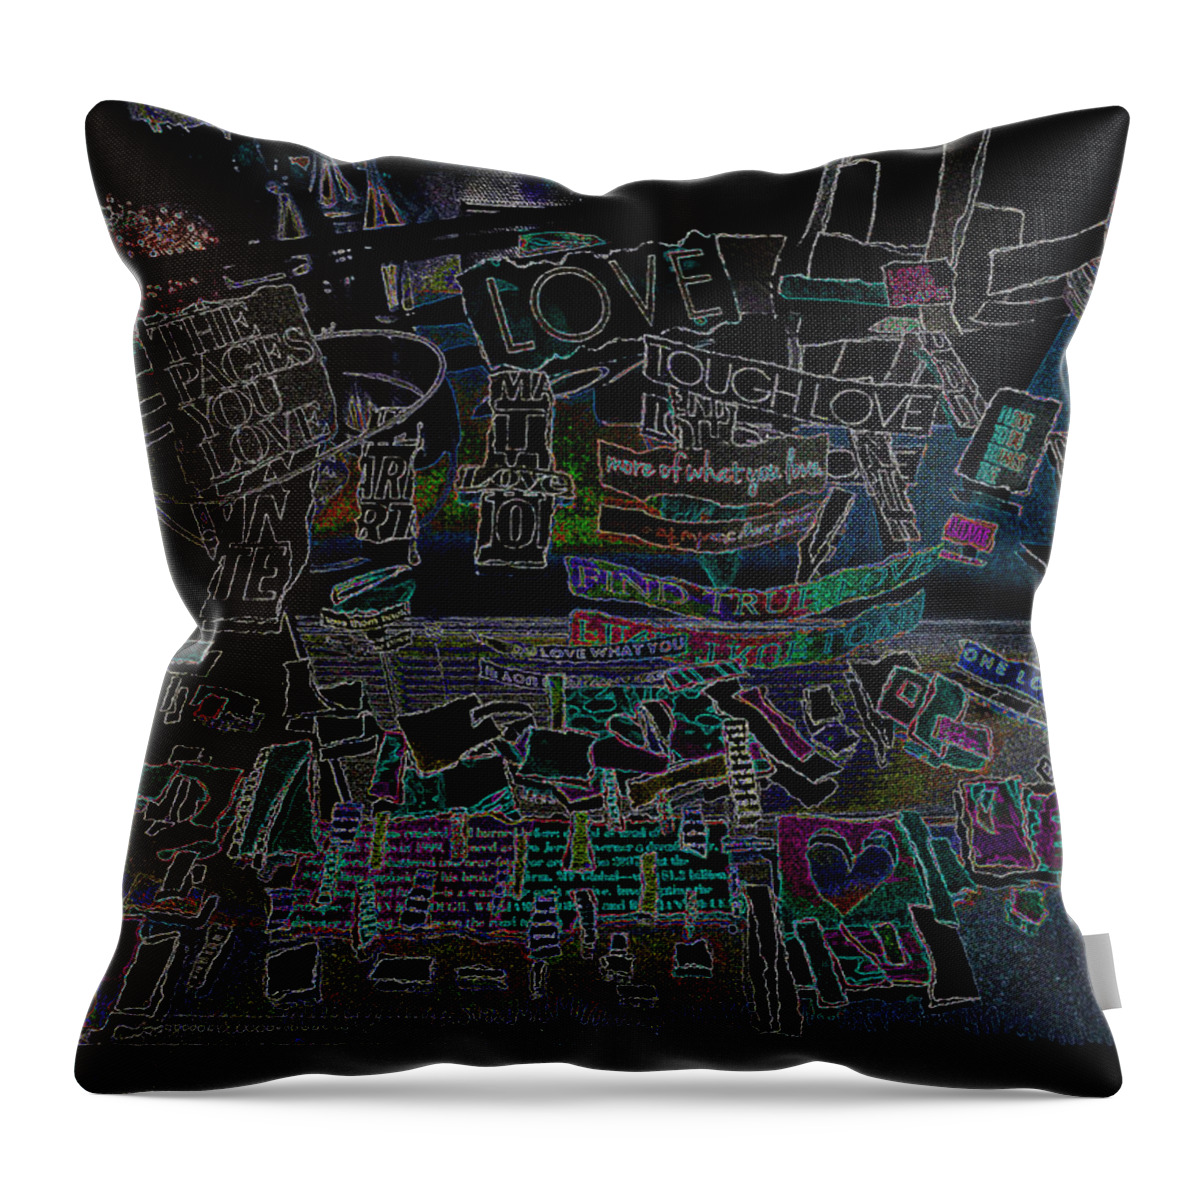 It Is A Conversation - It Is An Intervention Throw Pillow featuring the photograph It Is A Conversation - It Is An Intervention by Kenneth James